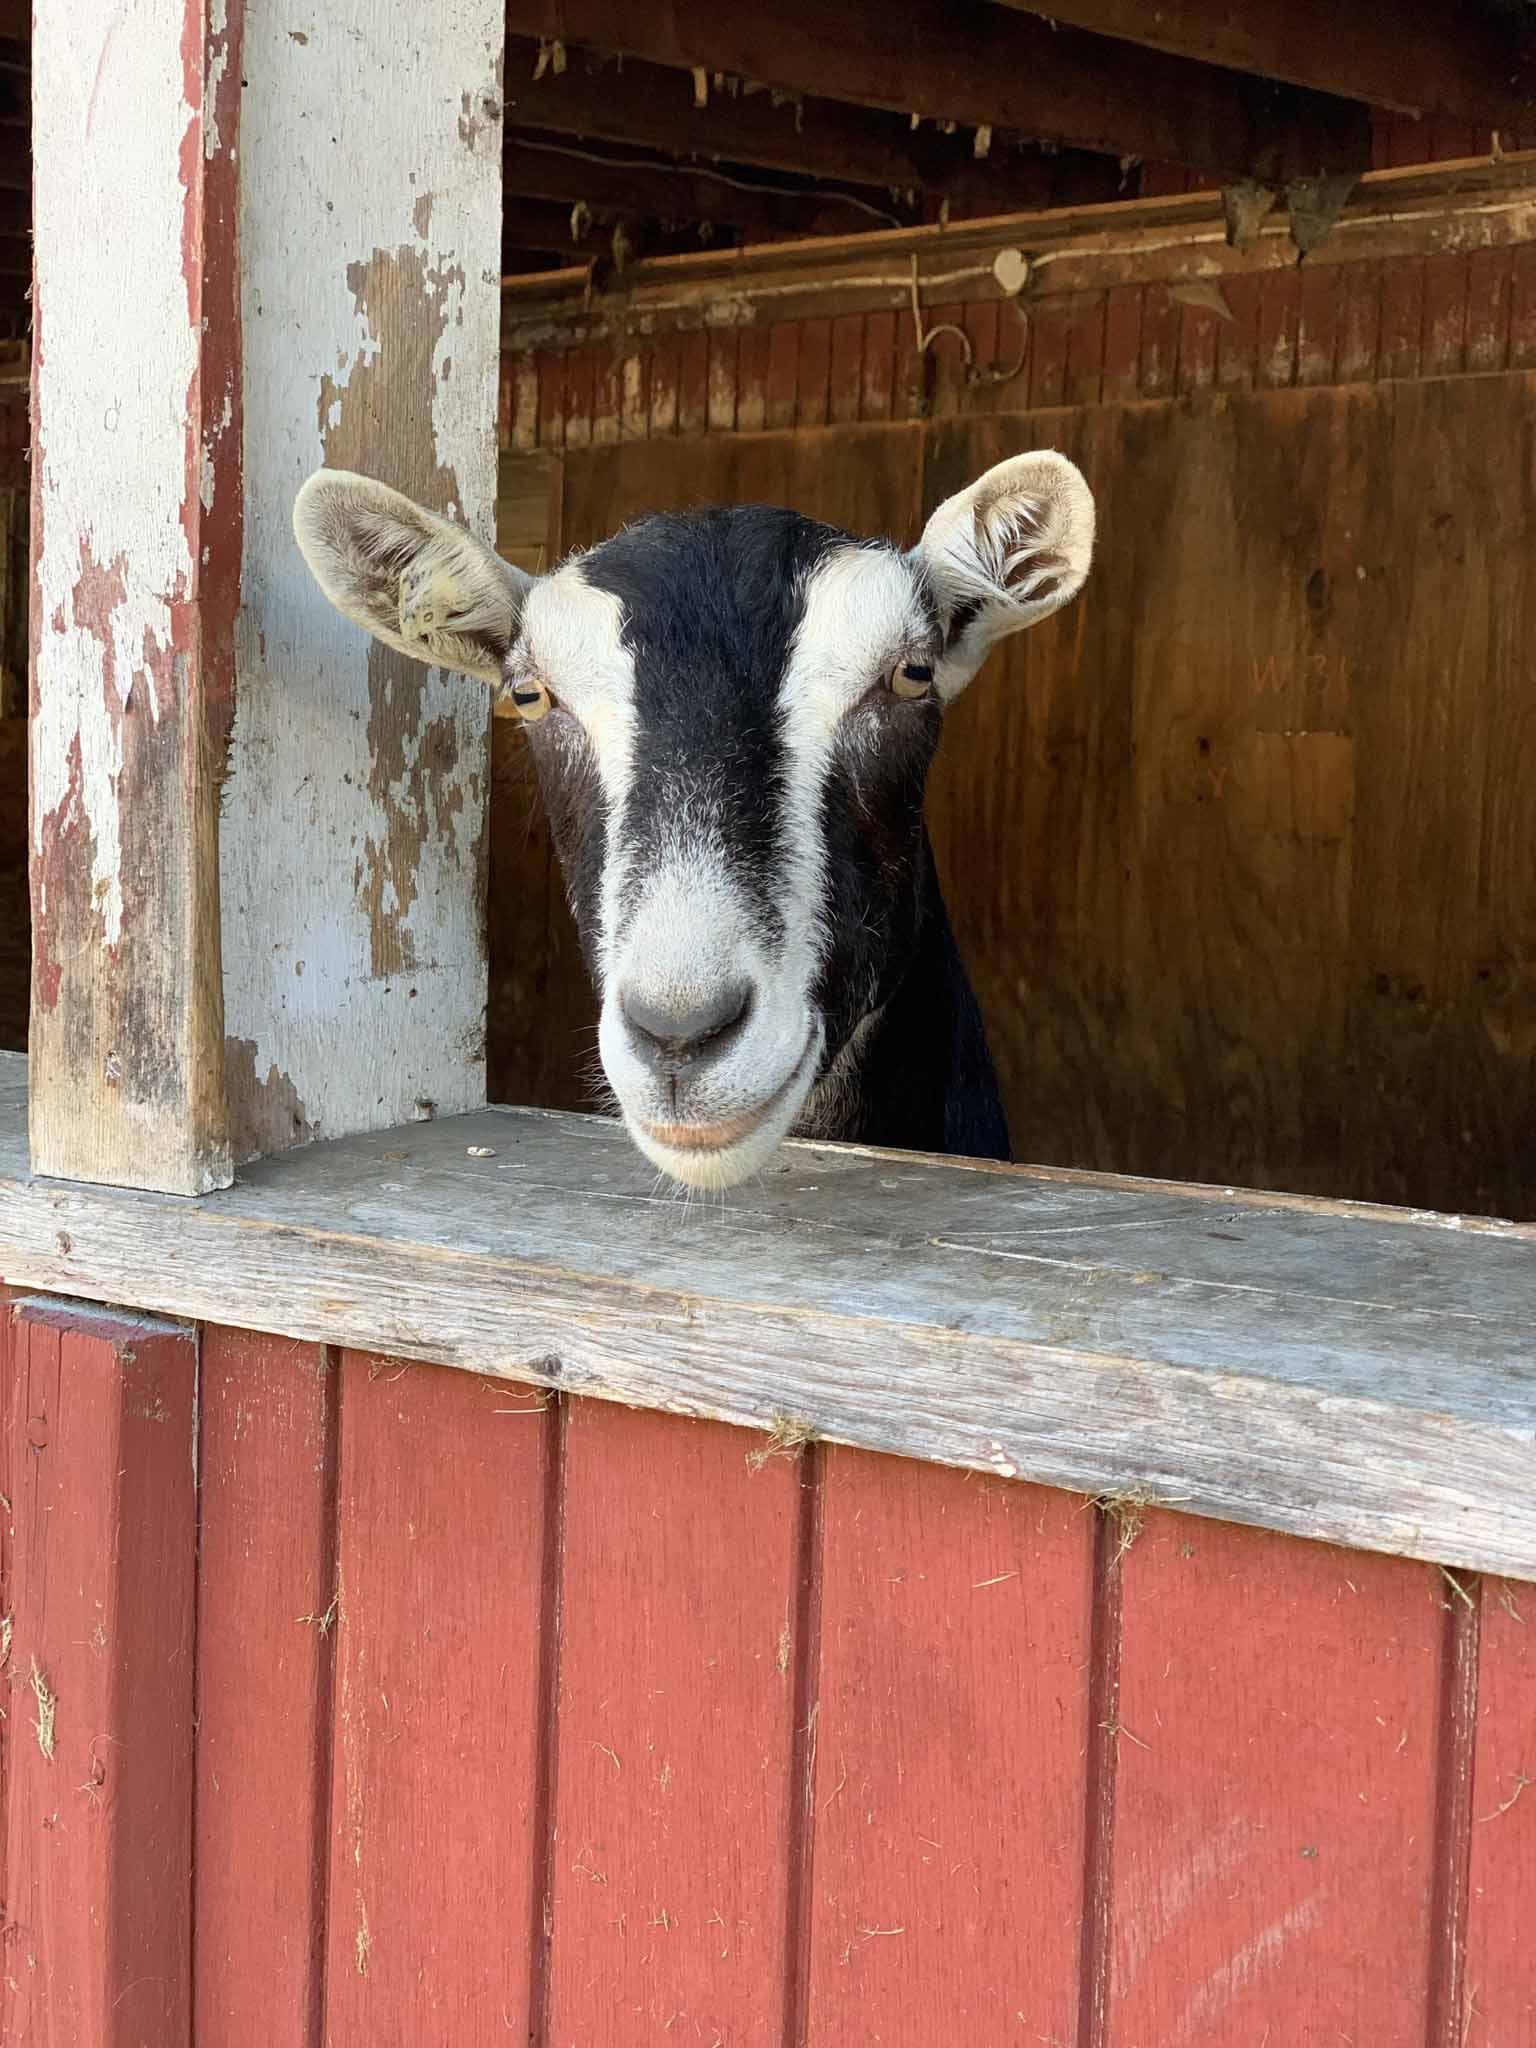 An Adorable Alpine Goat In A Barn